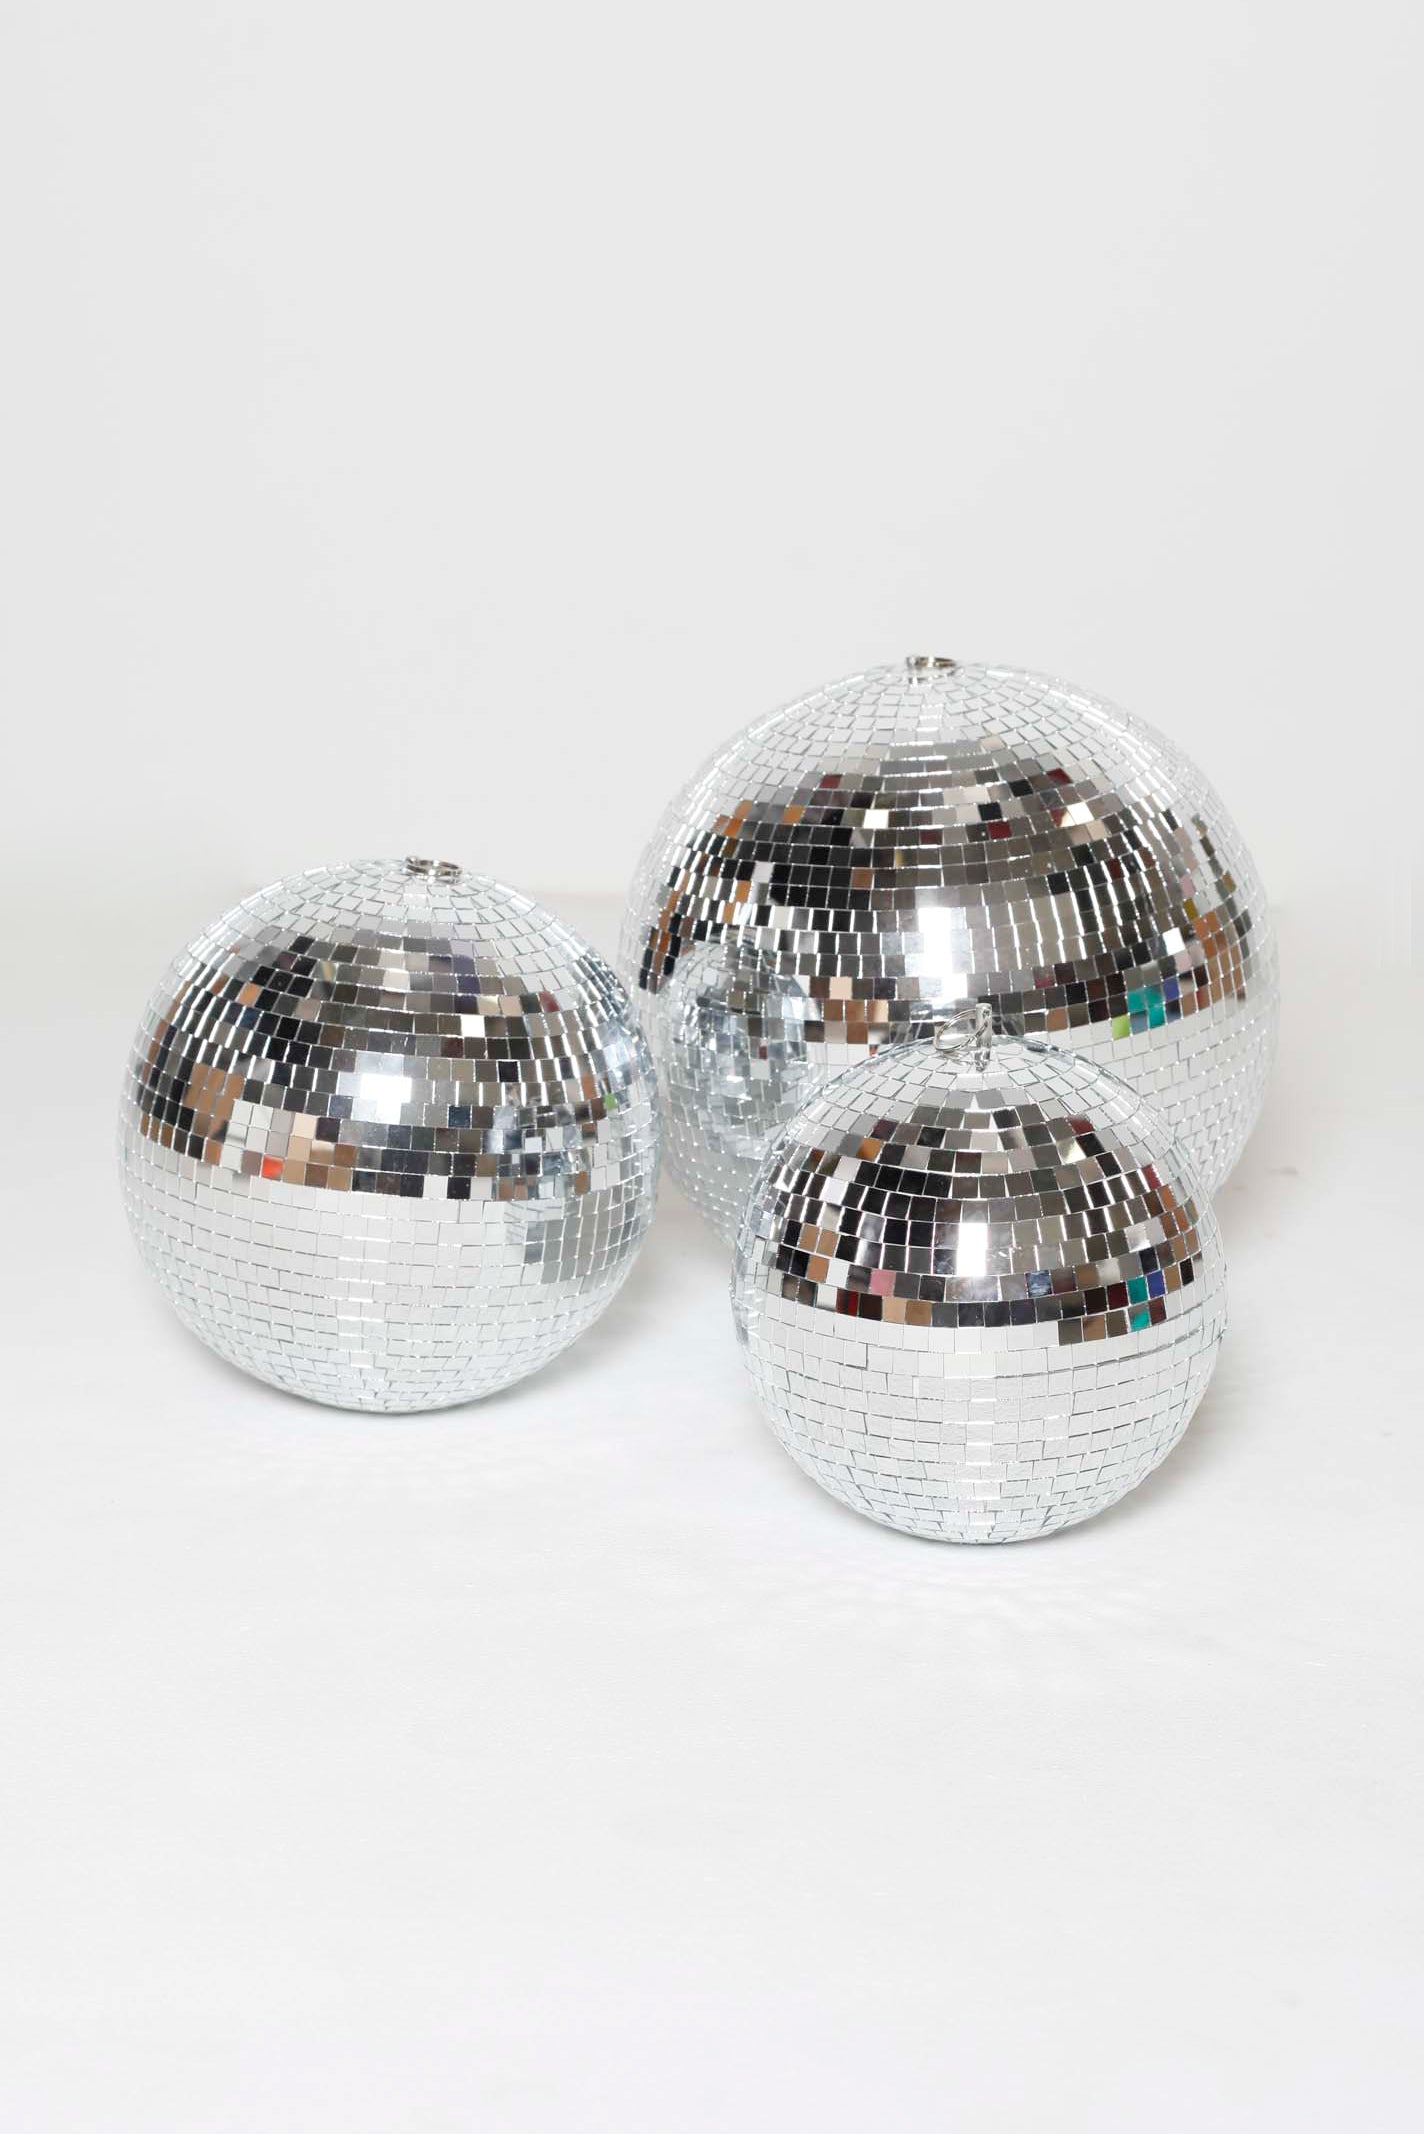 Mirrored Disco Ball (4 sizes available)